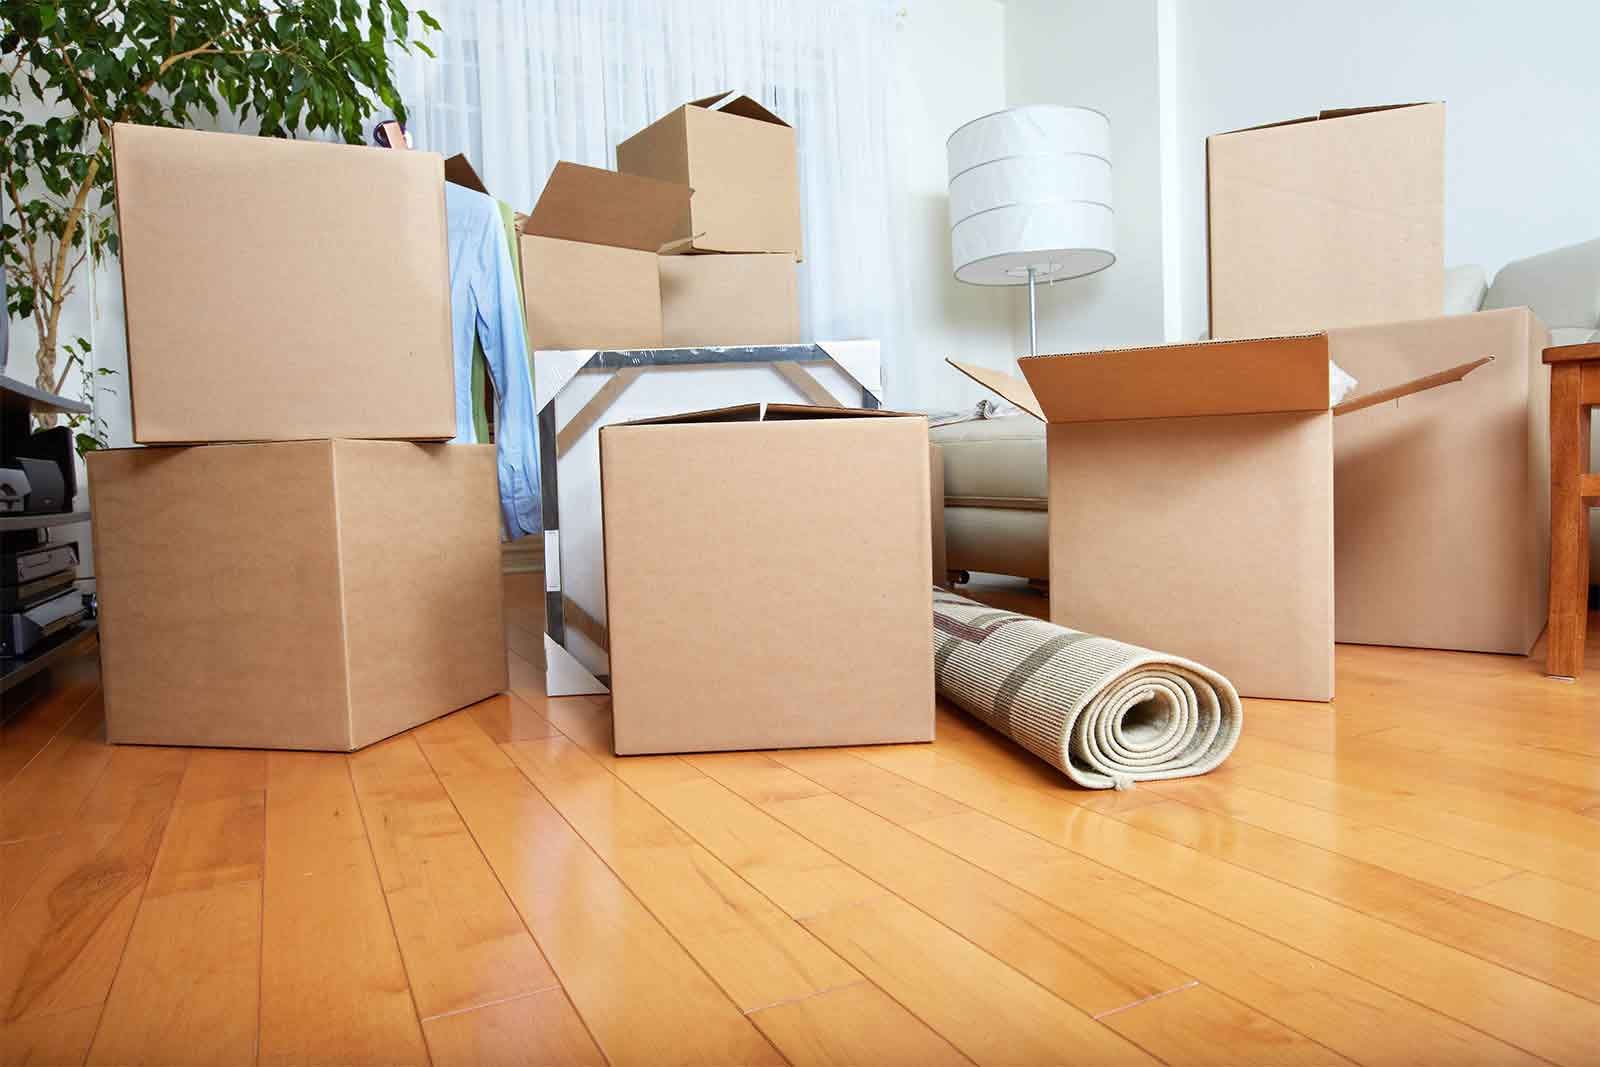 Reasons To Hire Removals’ Company When Moving To Another Place